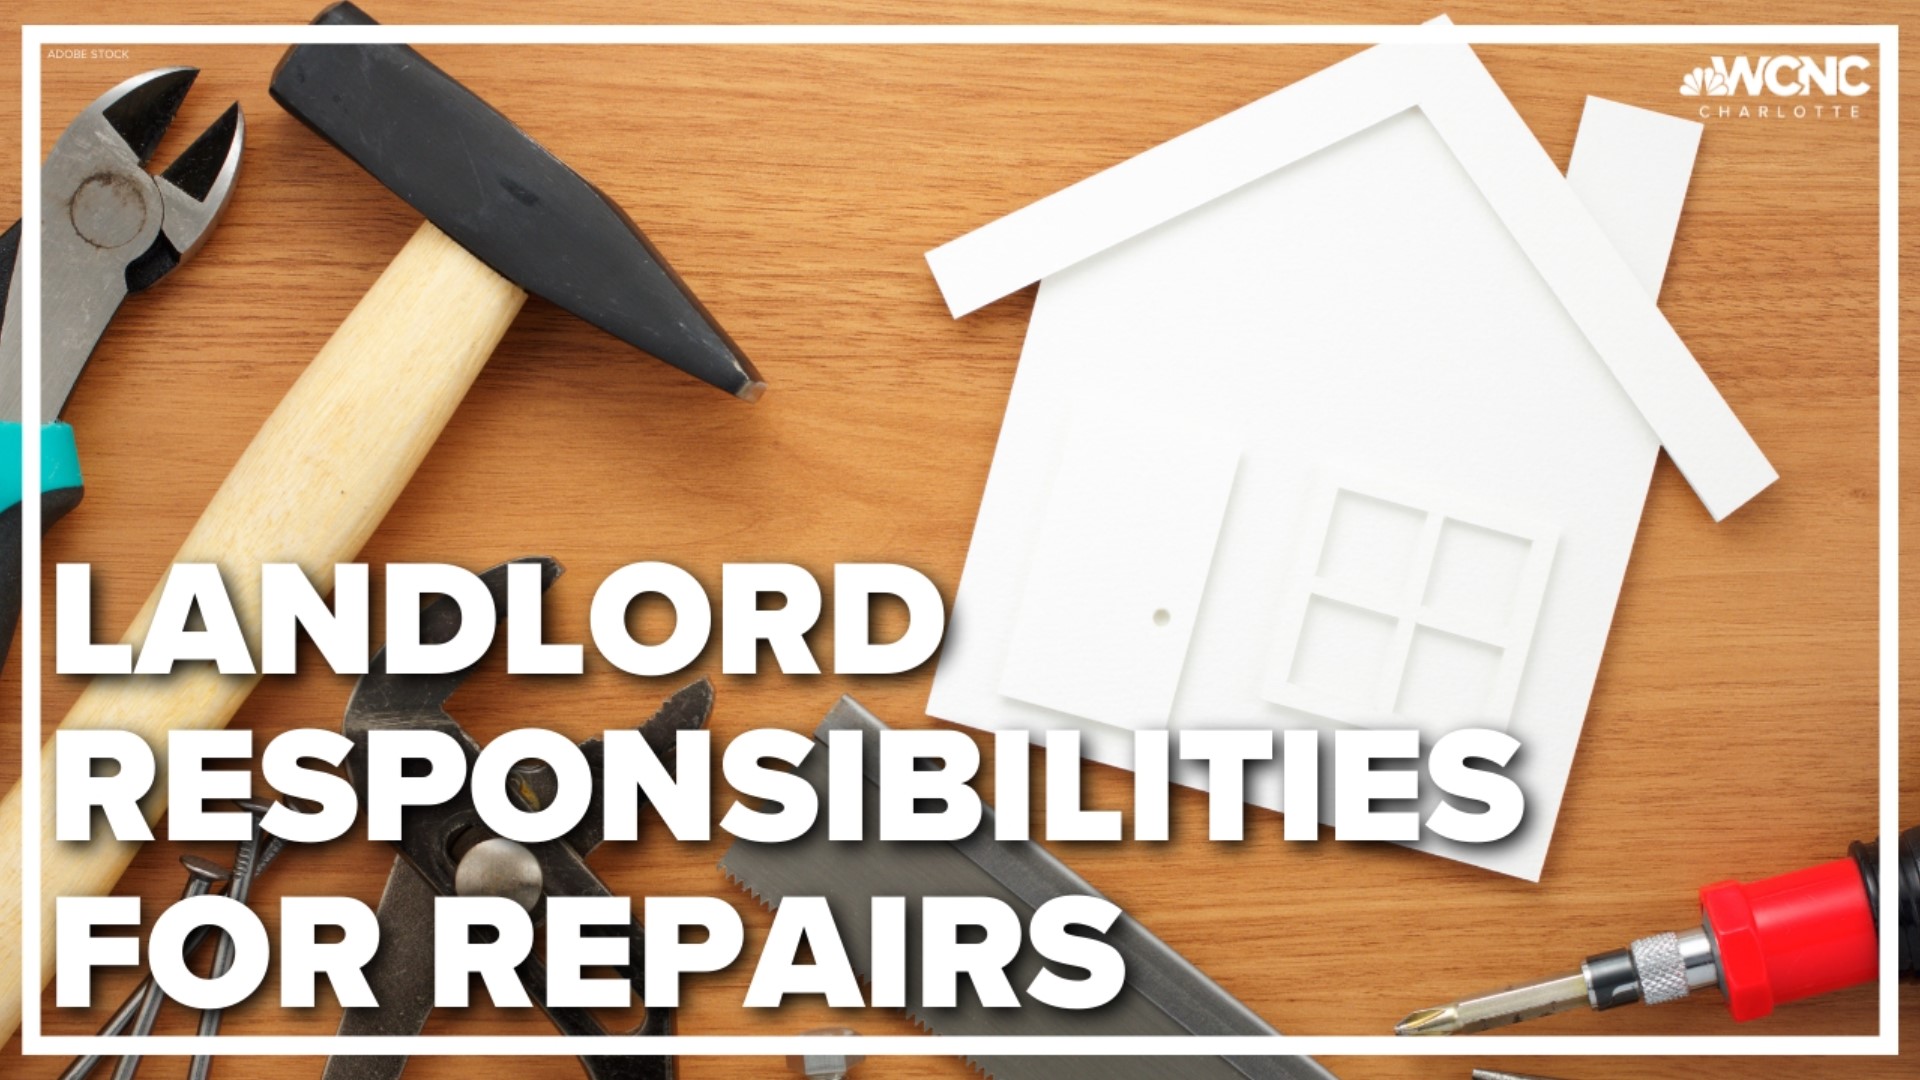 nc-landlords-are-required-to-make-repairs-in-a-timely-fashion-wcnc